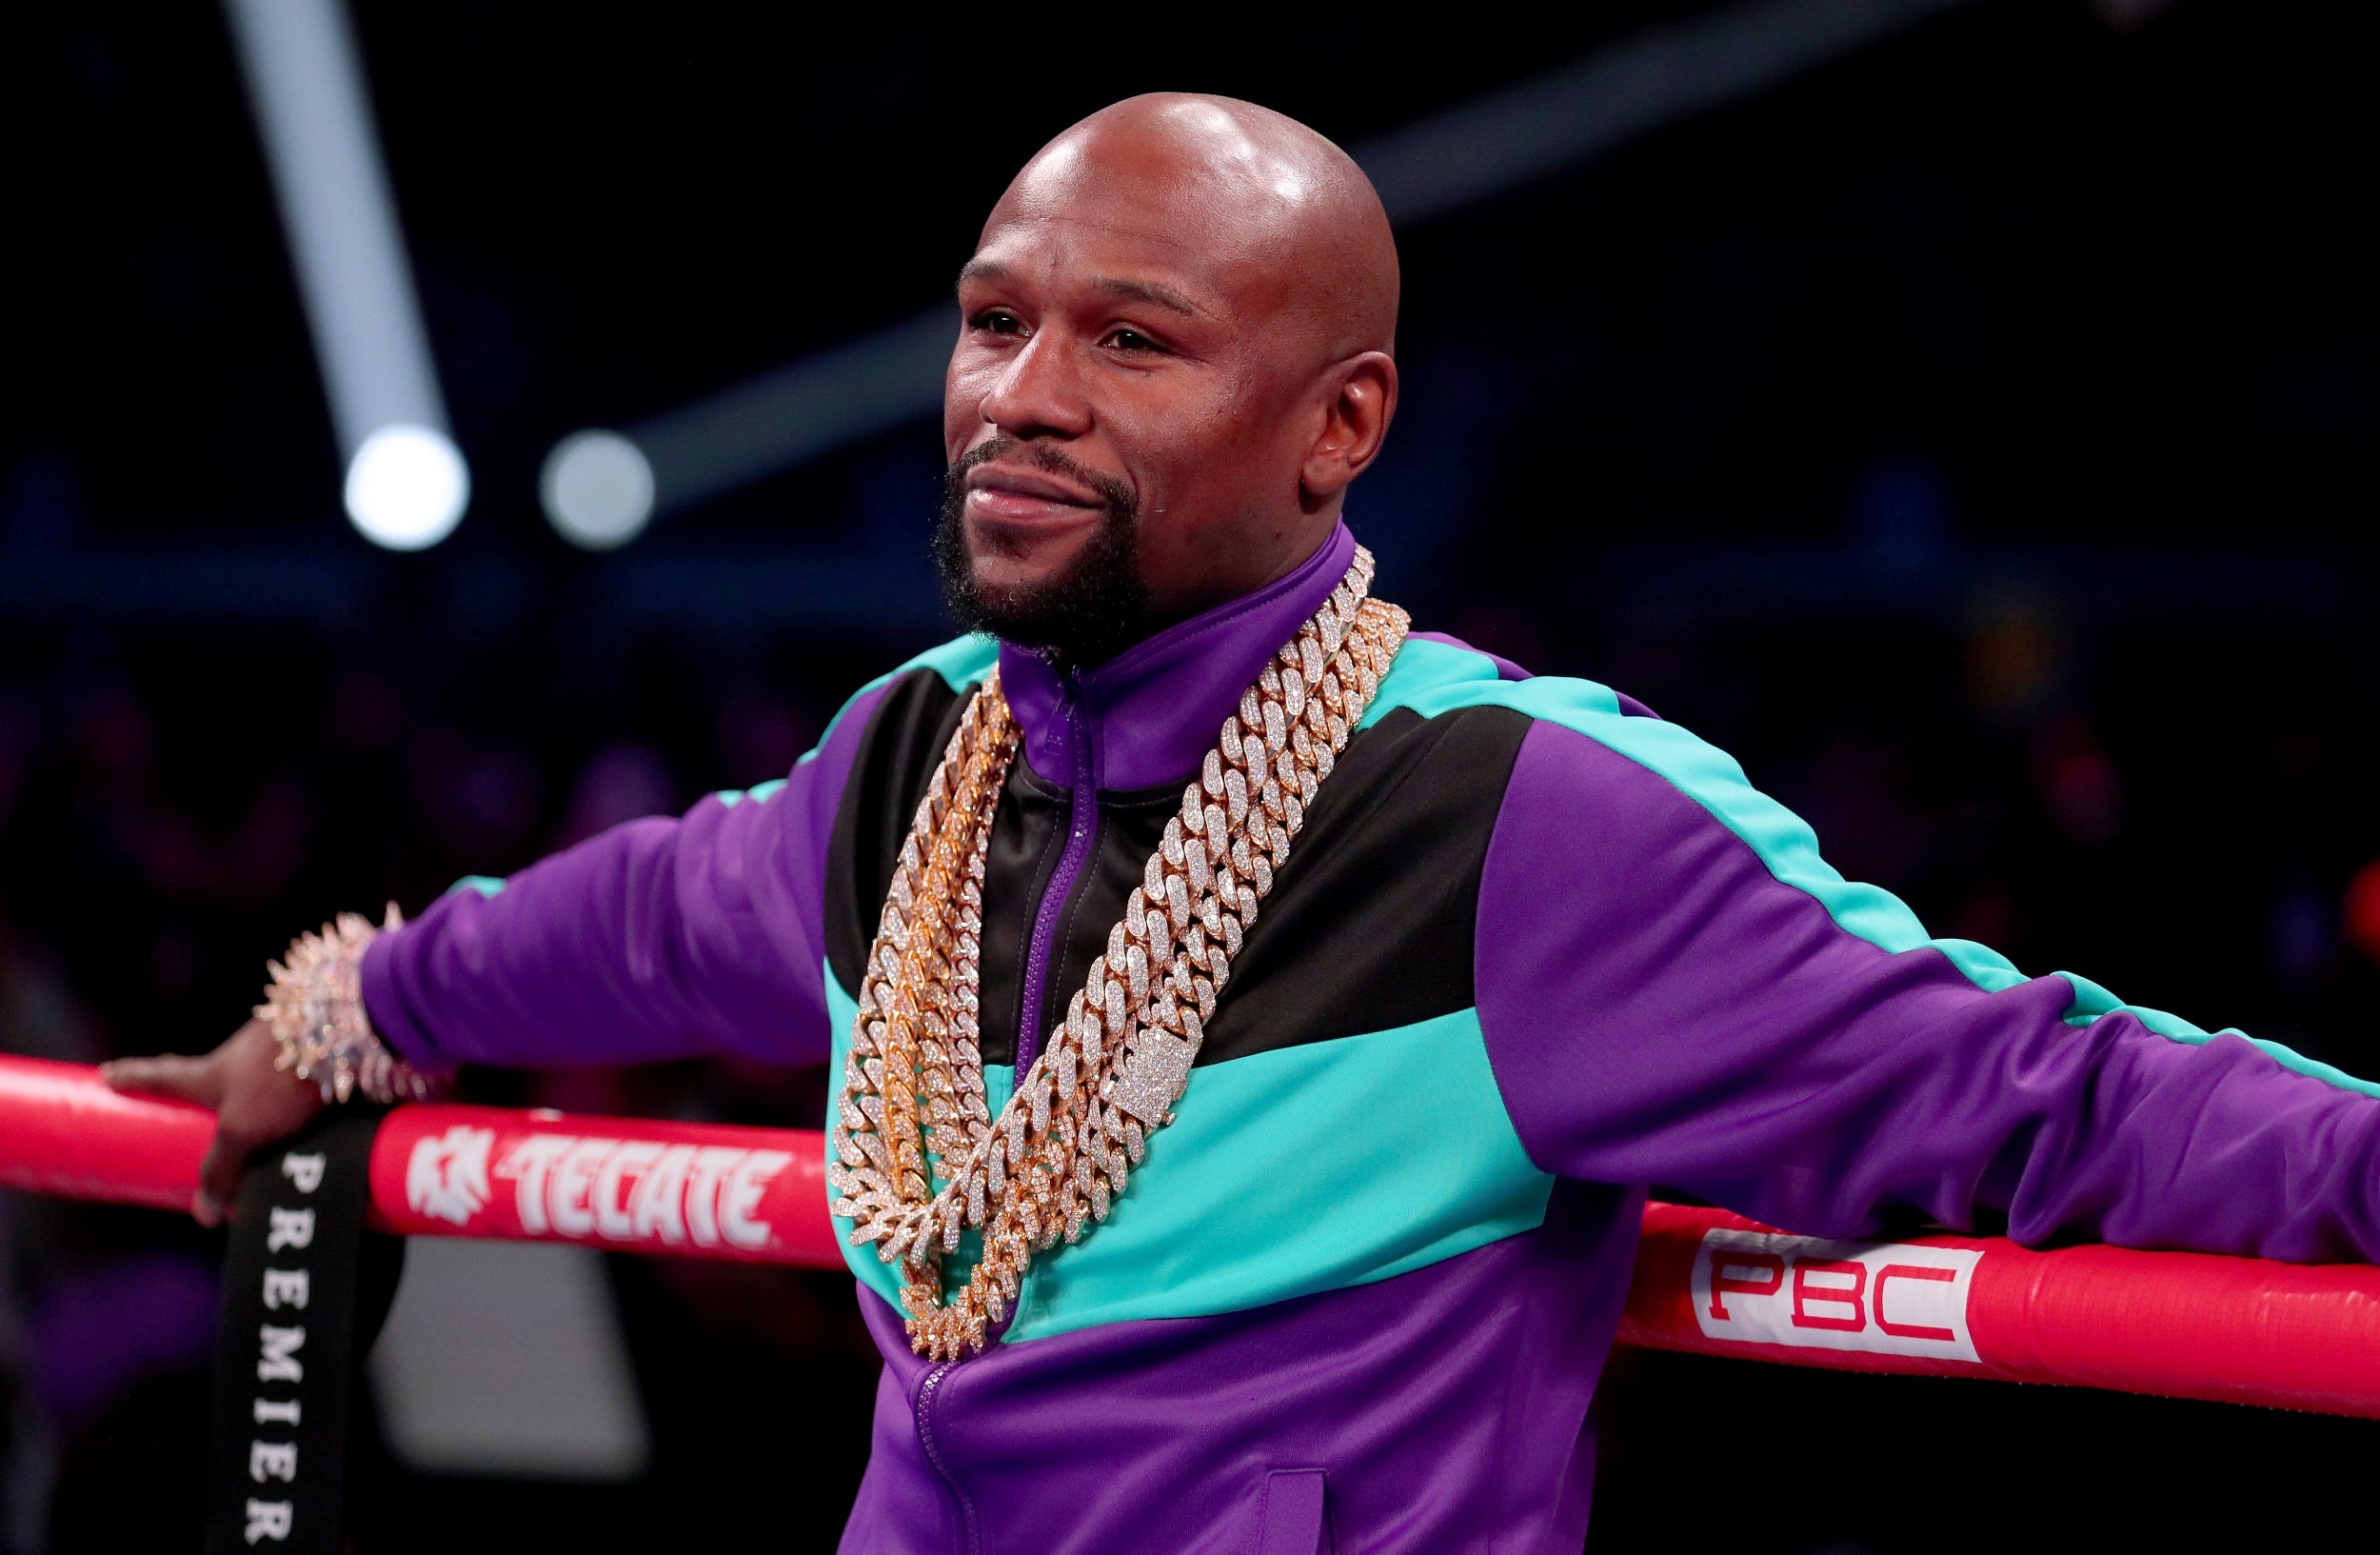 Floyd Mayweather admits he’s made mistakes (Getty)